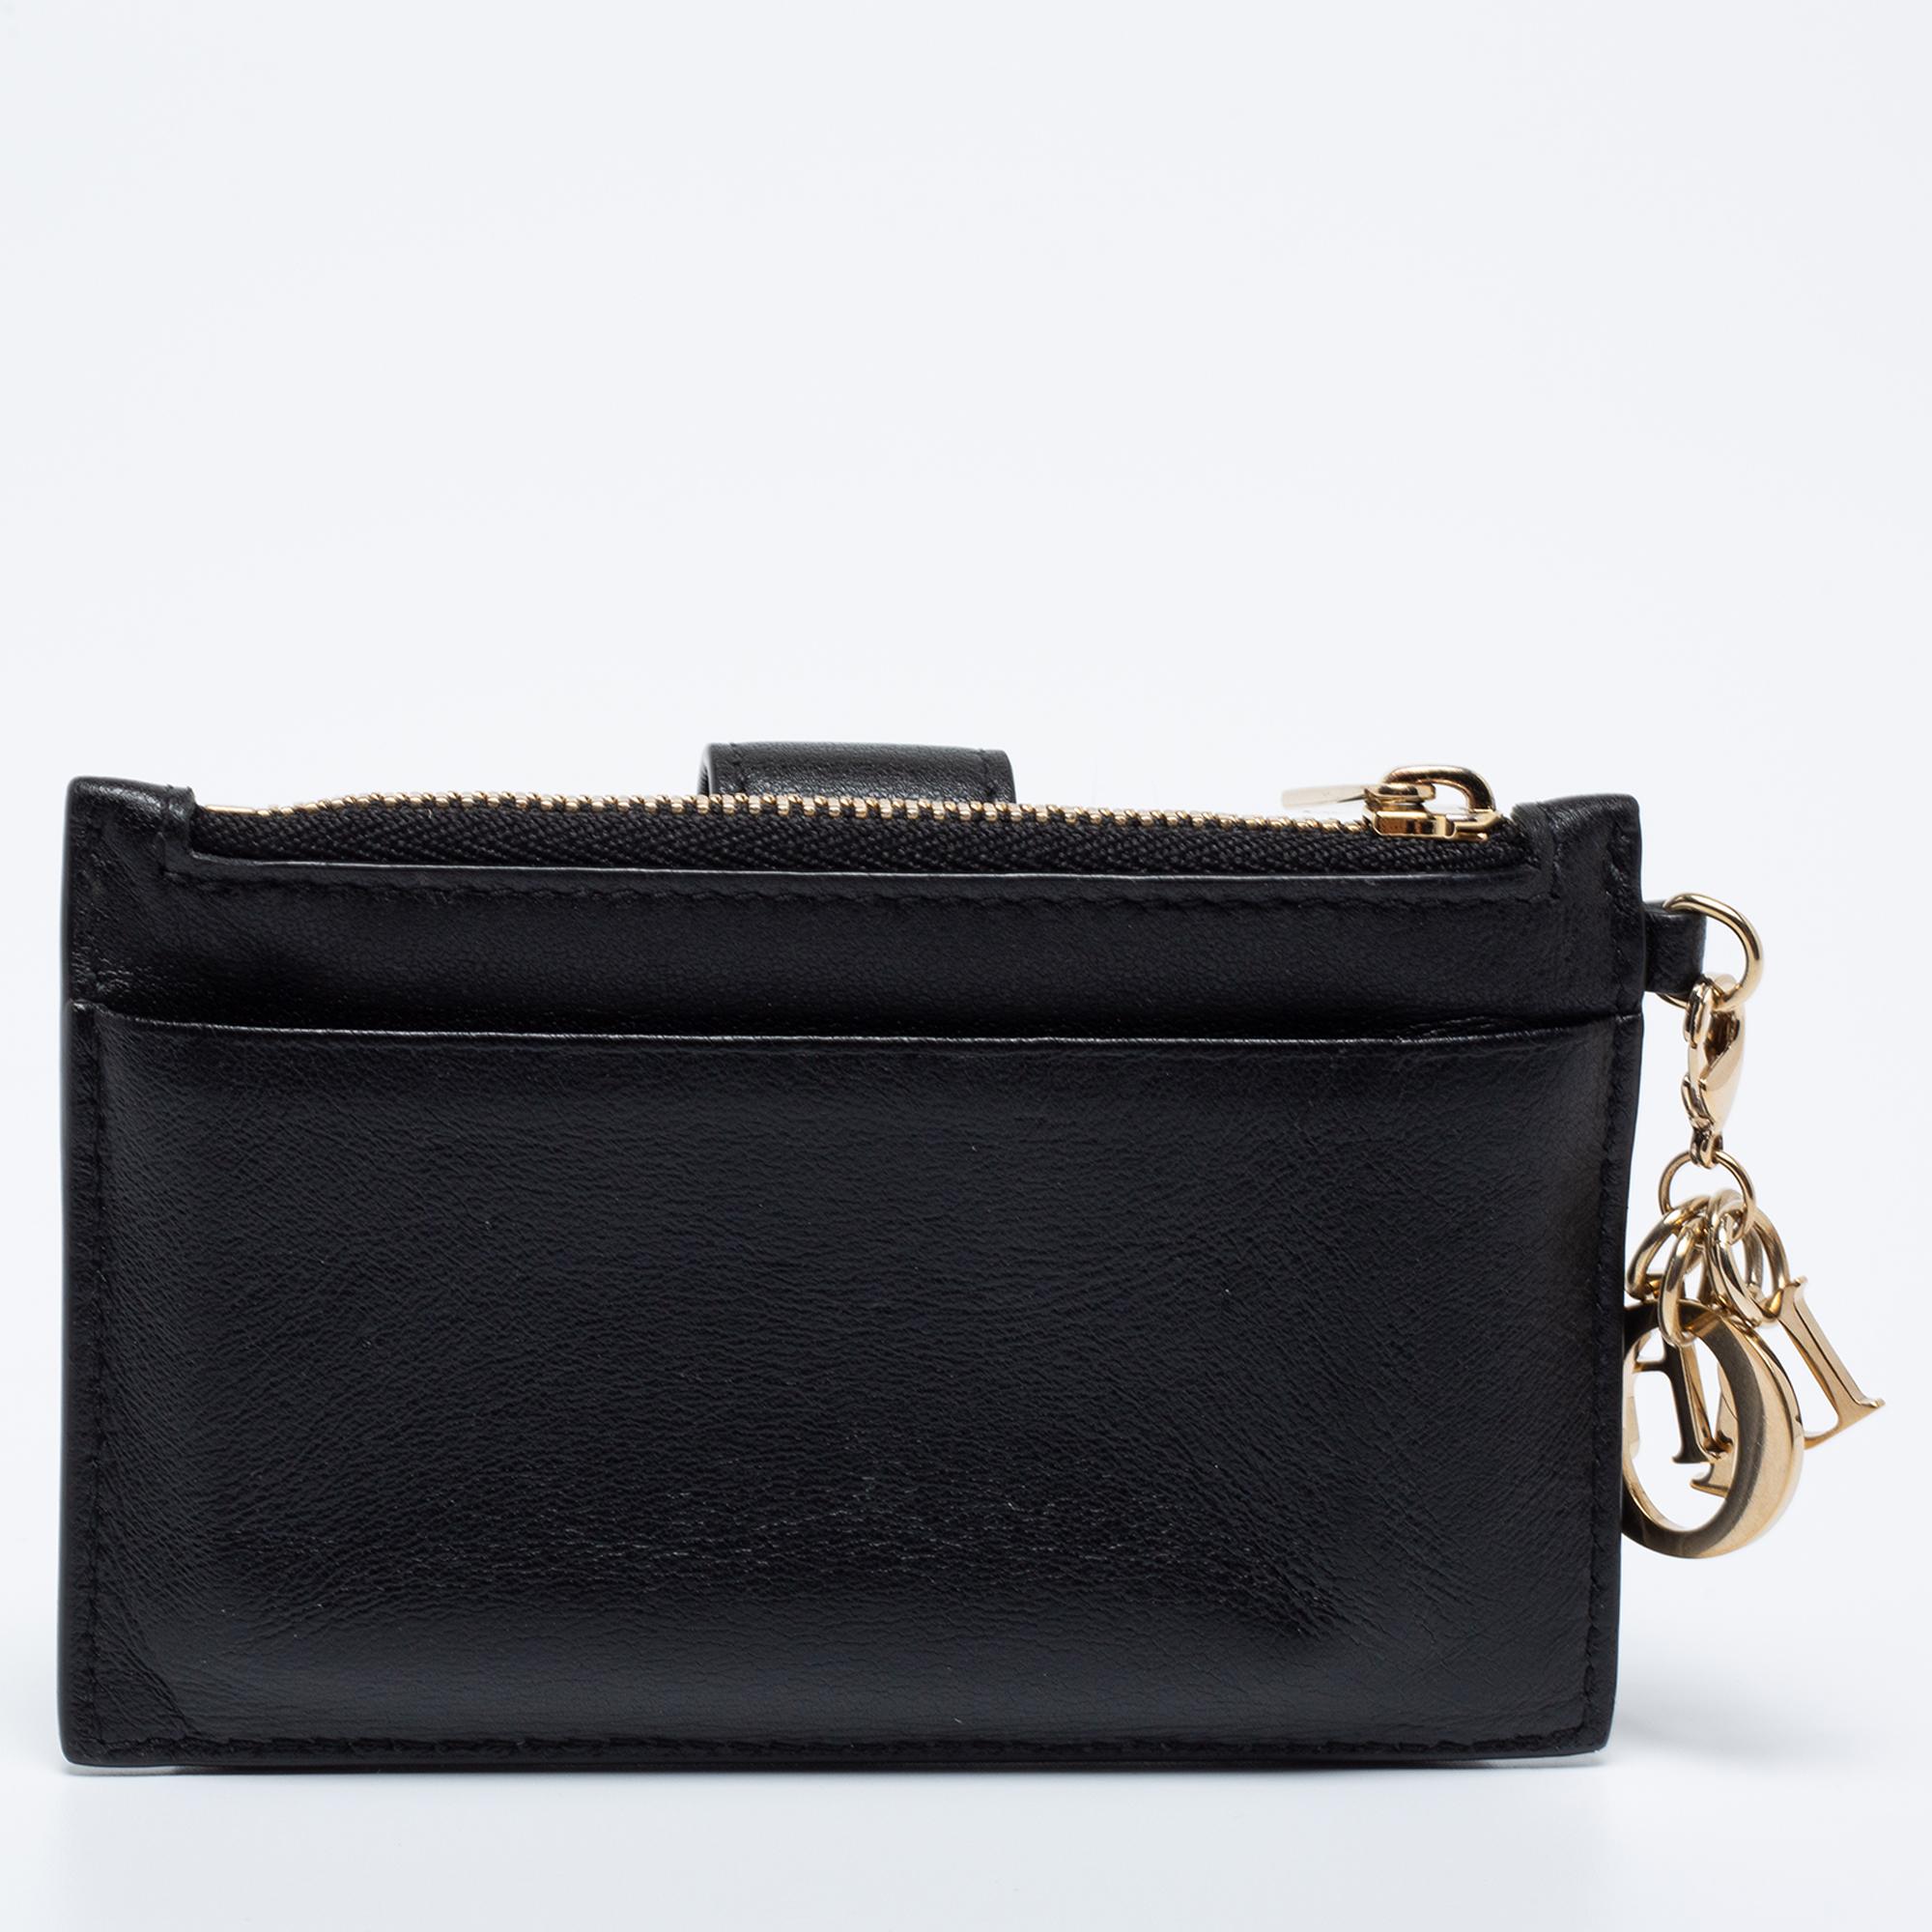 This card holder by Dior is a fine accessory to add to your everyday style edit. Crafted using quilted leather, it comes in black and has a lined interior to hold your cards. The DIOR charms give it a luxe finish.

